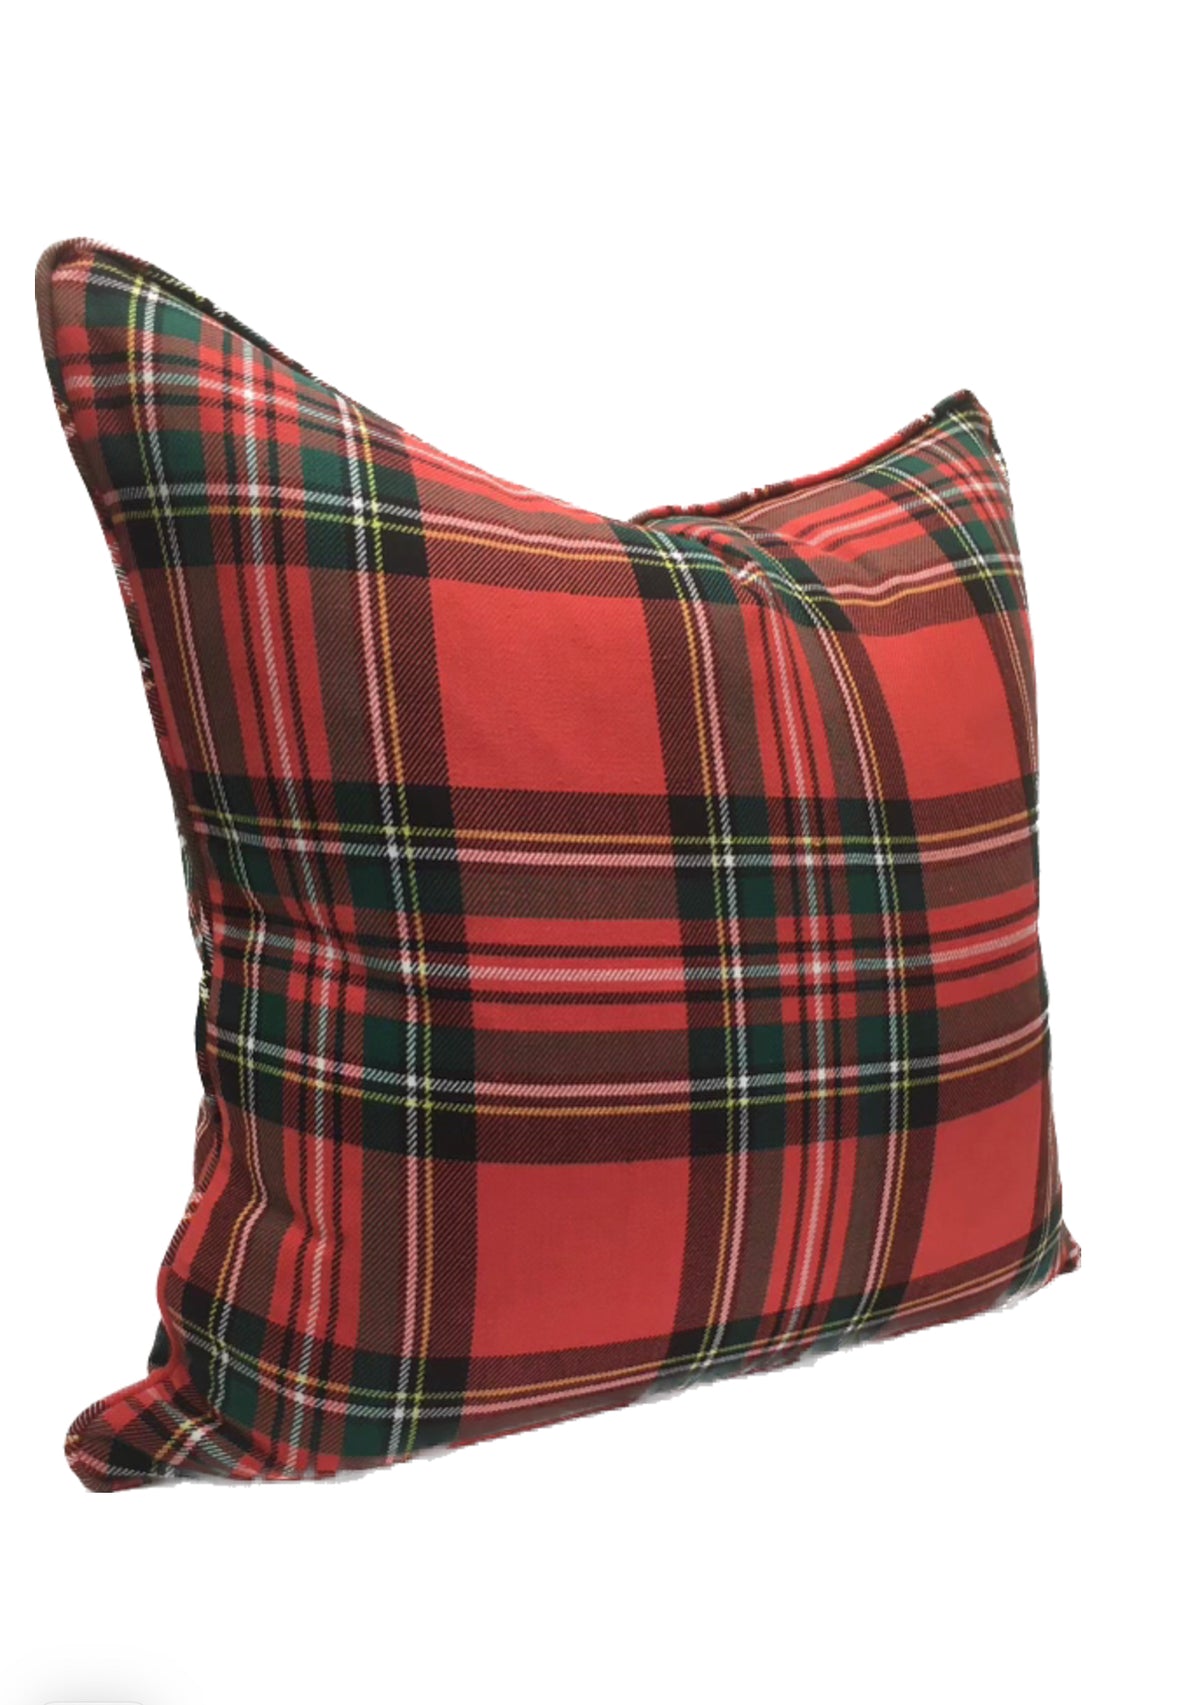 Decorative Pillow Cover in Red Plaid Tartan Fabric